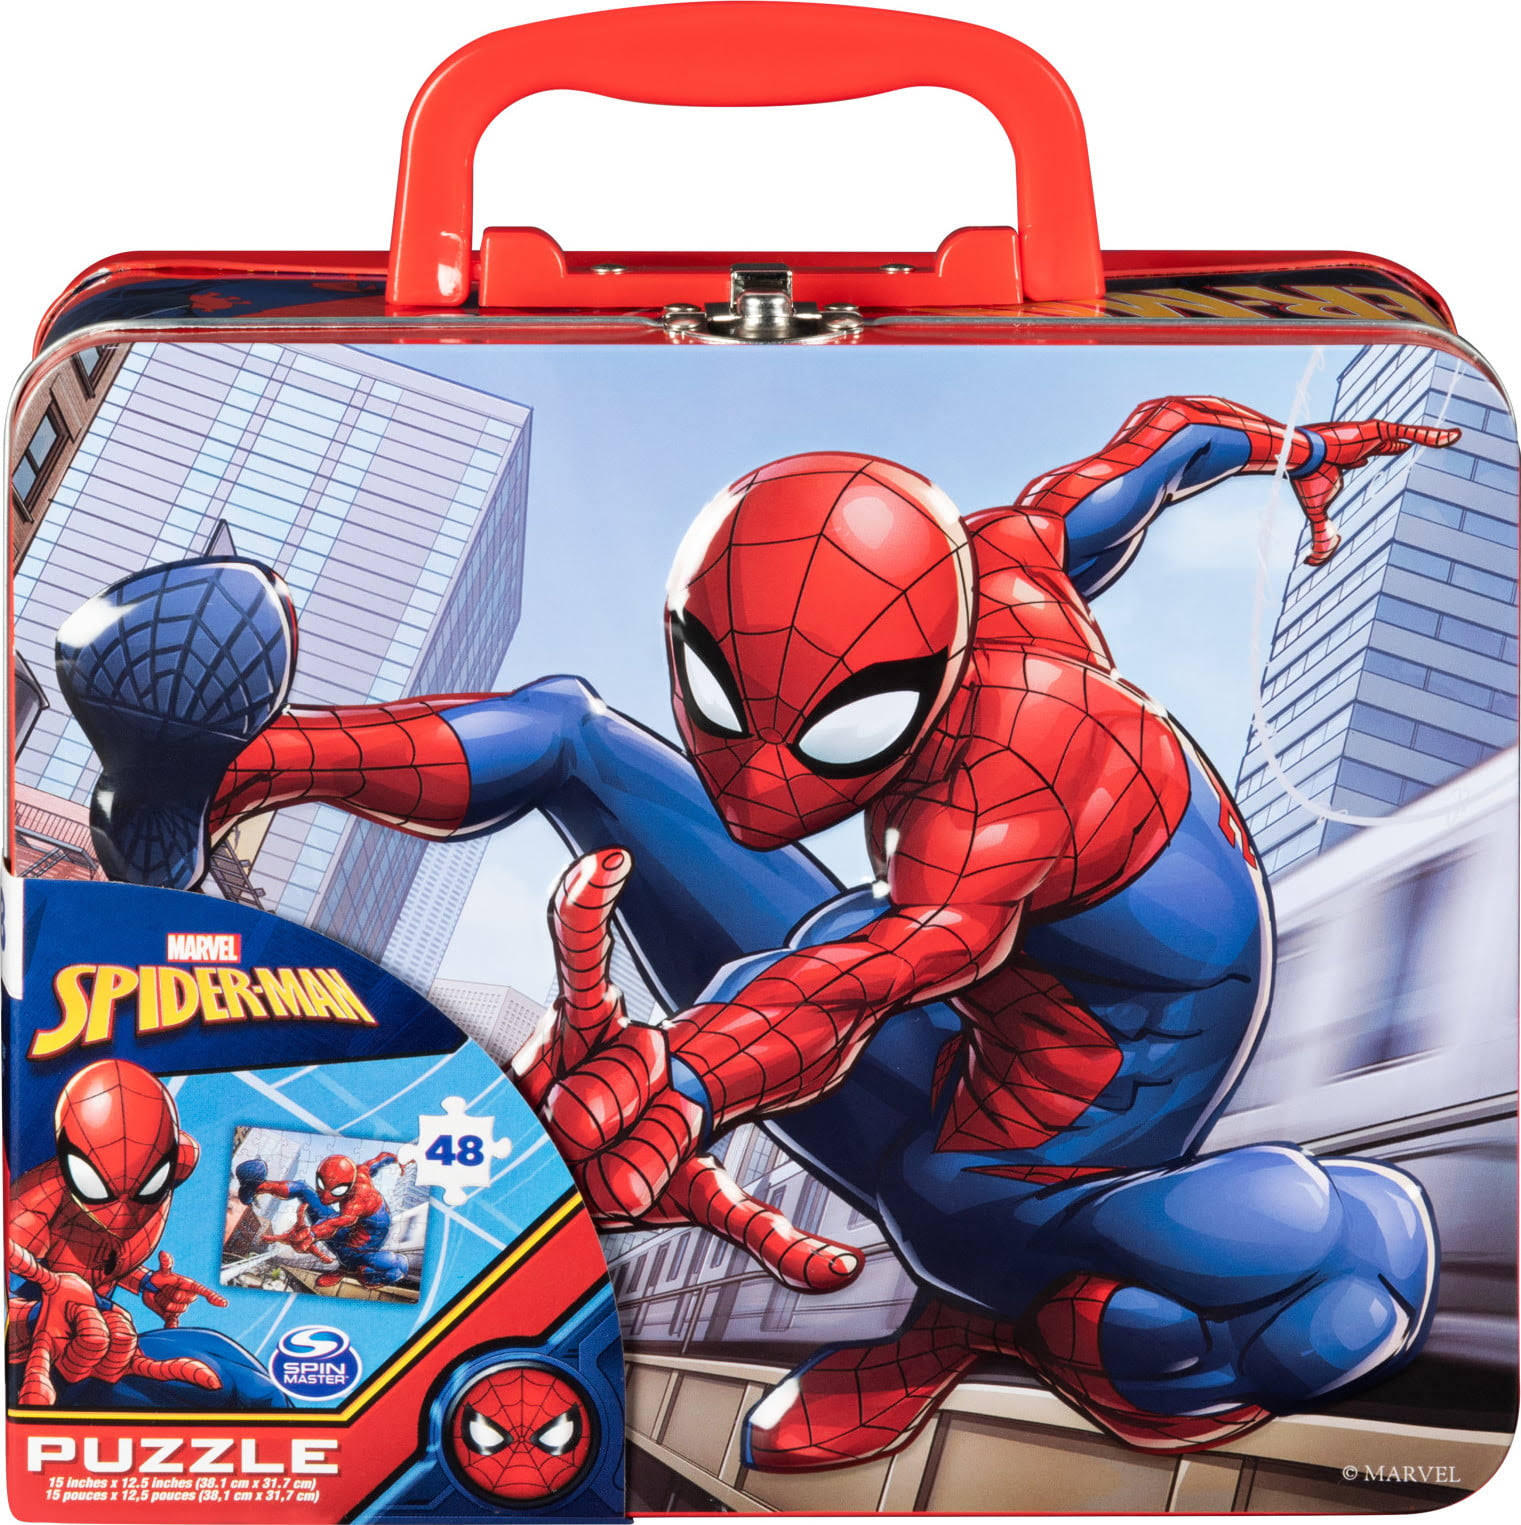 Marvel Avengers Spider-Man 48 Piece Puzzle in Collector Tin (Lunchbox) New